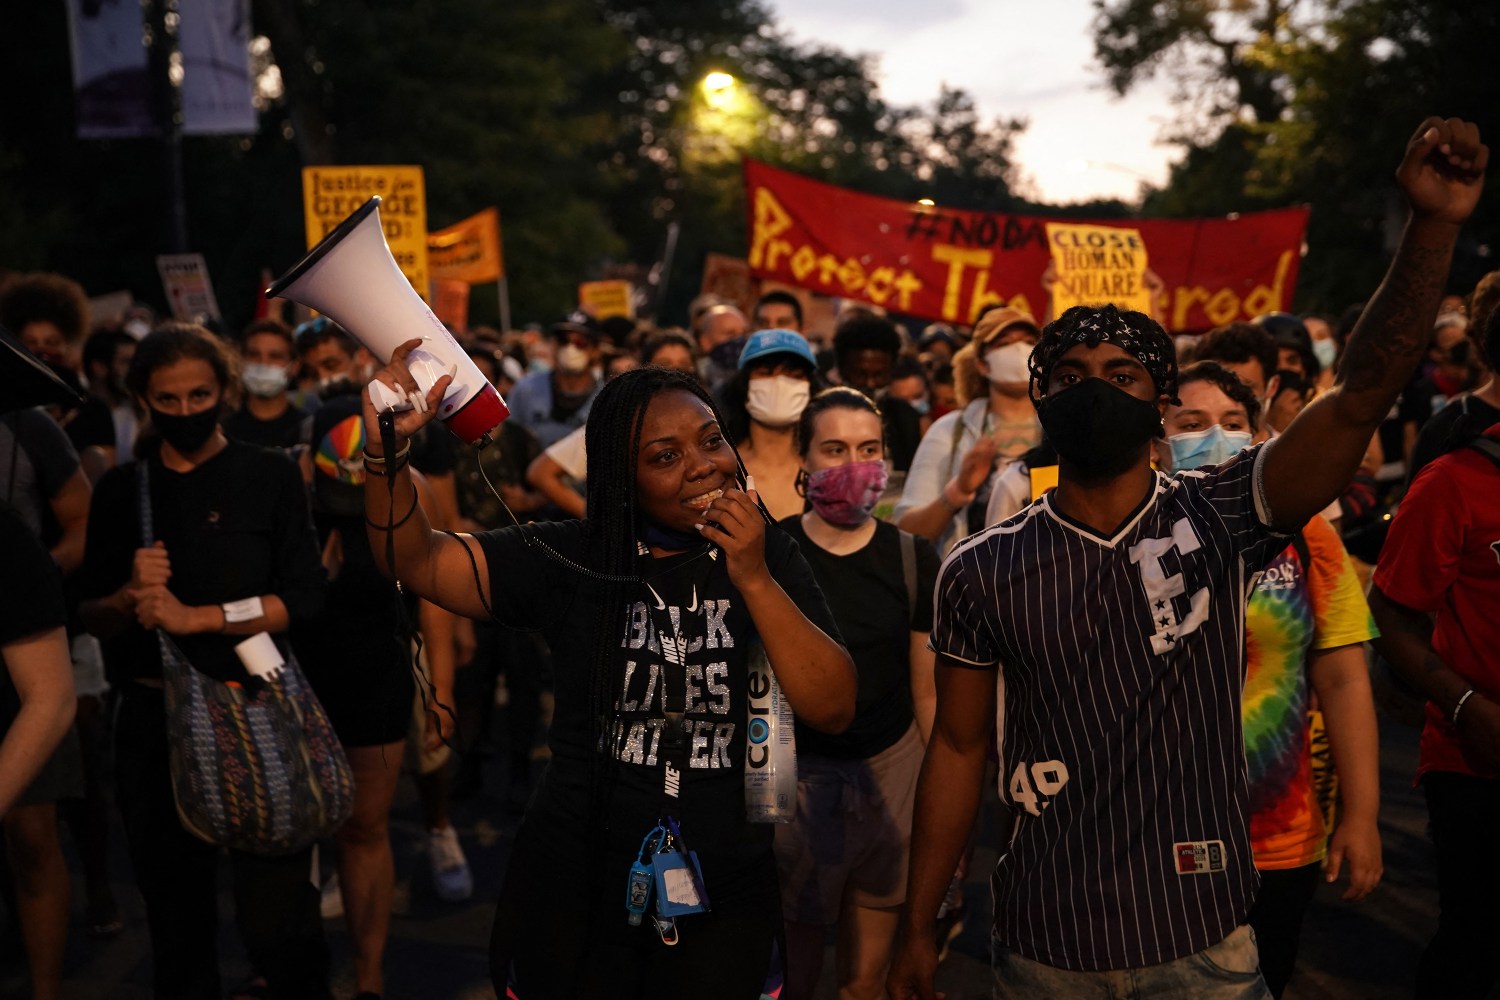 NO FILM, NO VIDEO, NO TV, NO DOCUMENTARY - Activists march through Chicago's North Lawndale neighborhood, IL, USA, during a rally to defund police on Friday, July 24, 2020. Photo by E. Jason Wambsgans/Chicago Tribune/TNS/ABACAPRESS.COM